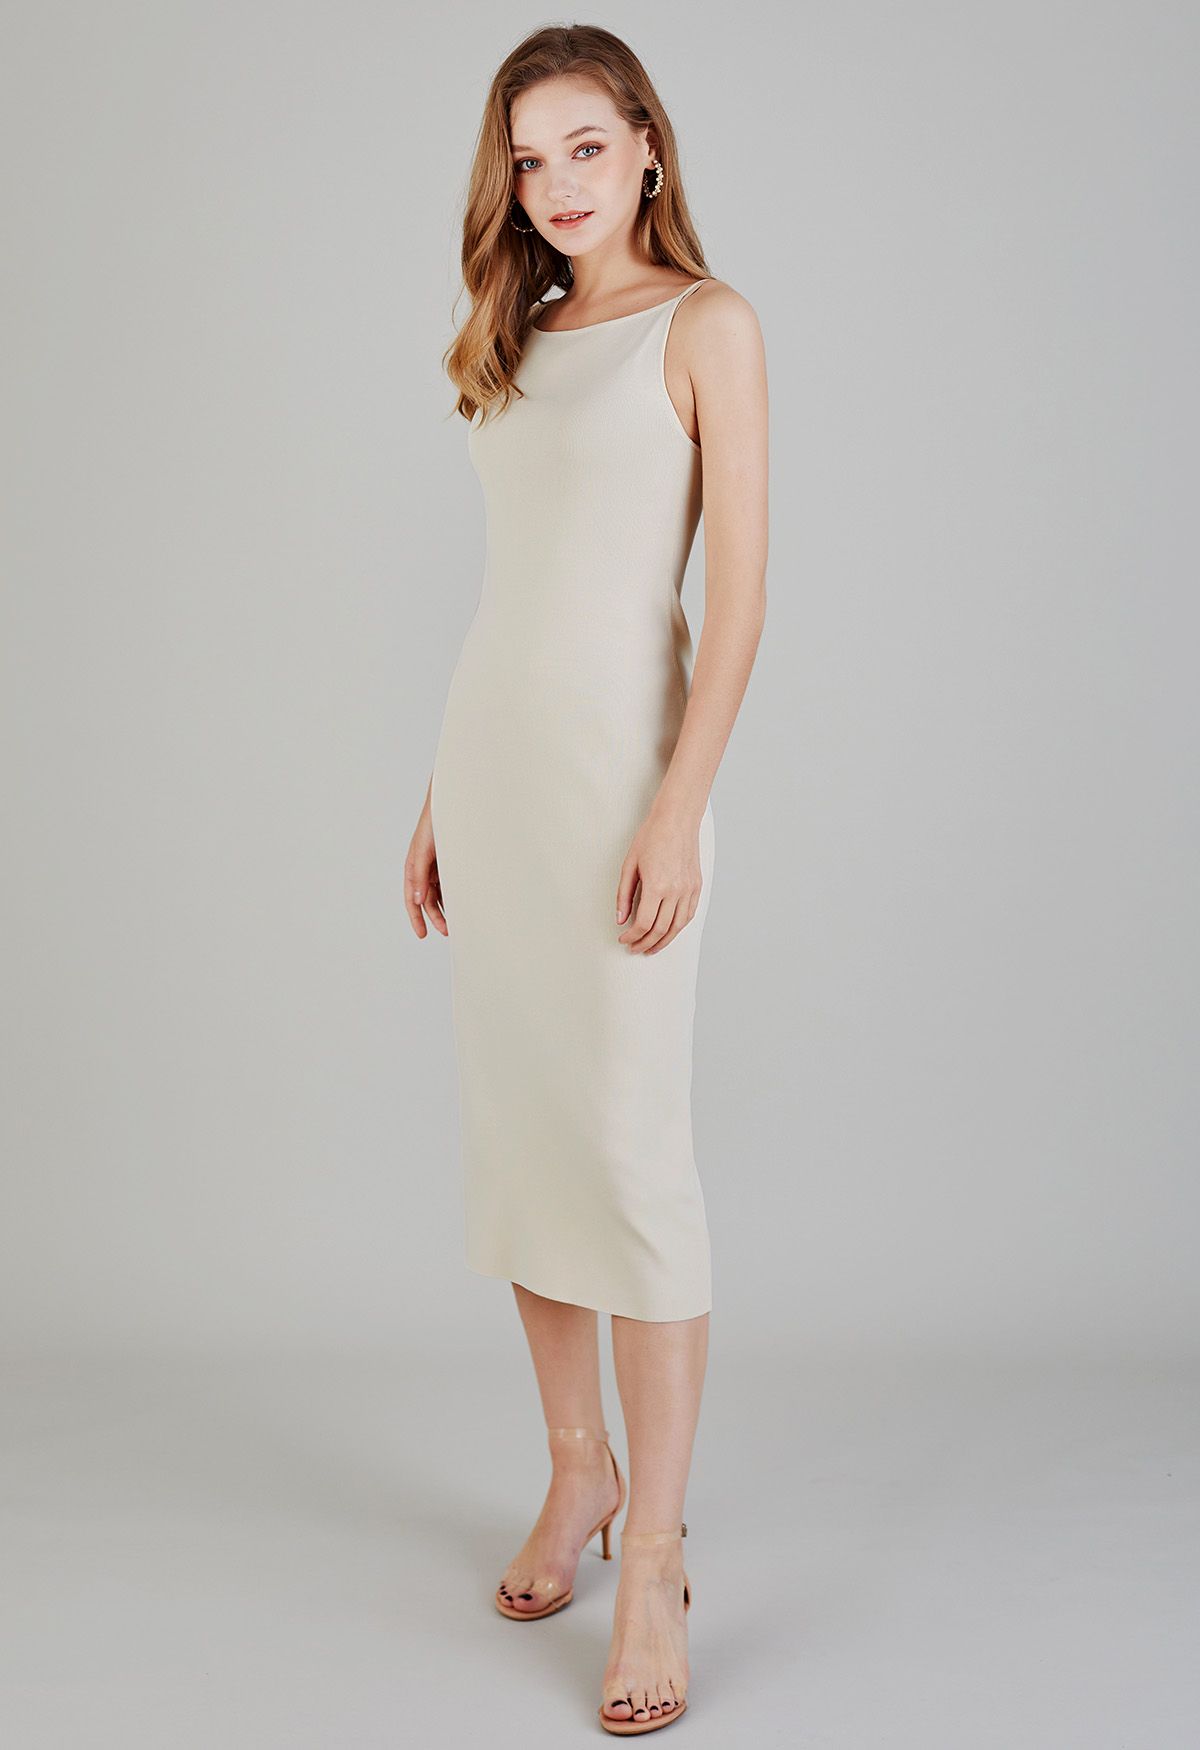 Ode to Simplicity Knit Cami Dress in Ivory